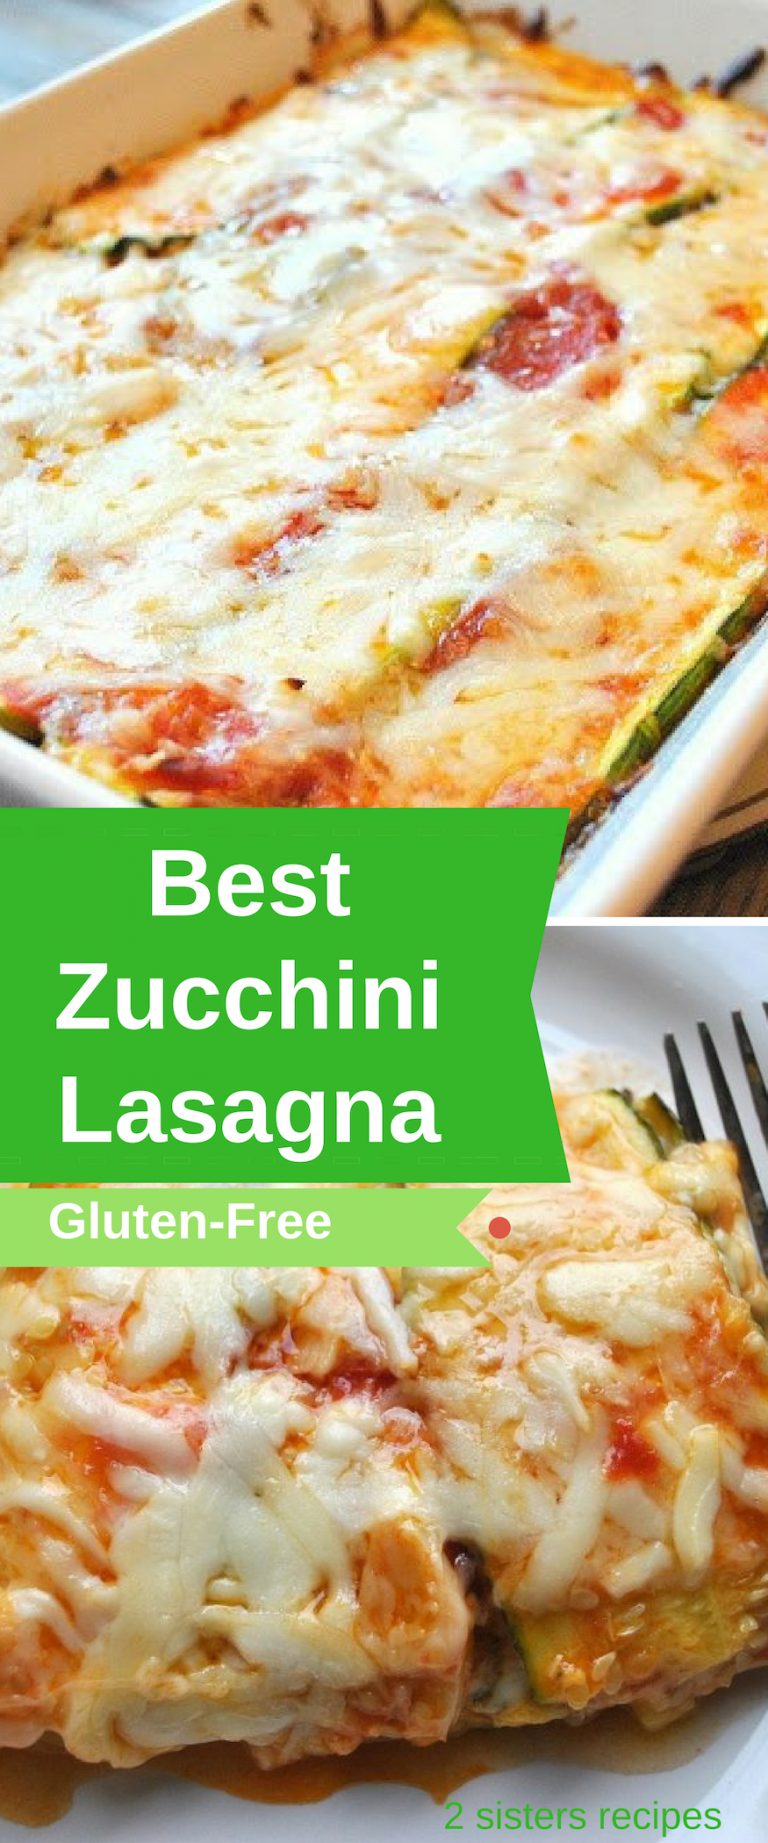 Best Zucchini Lasagna without Noodles 2 Sisters Recipes by Anna 